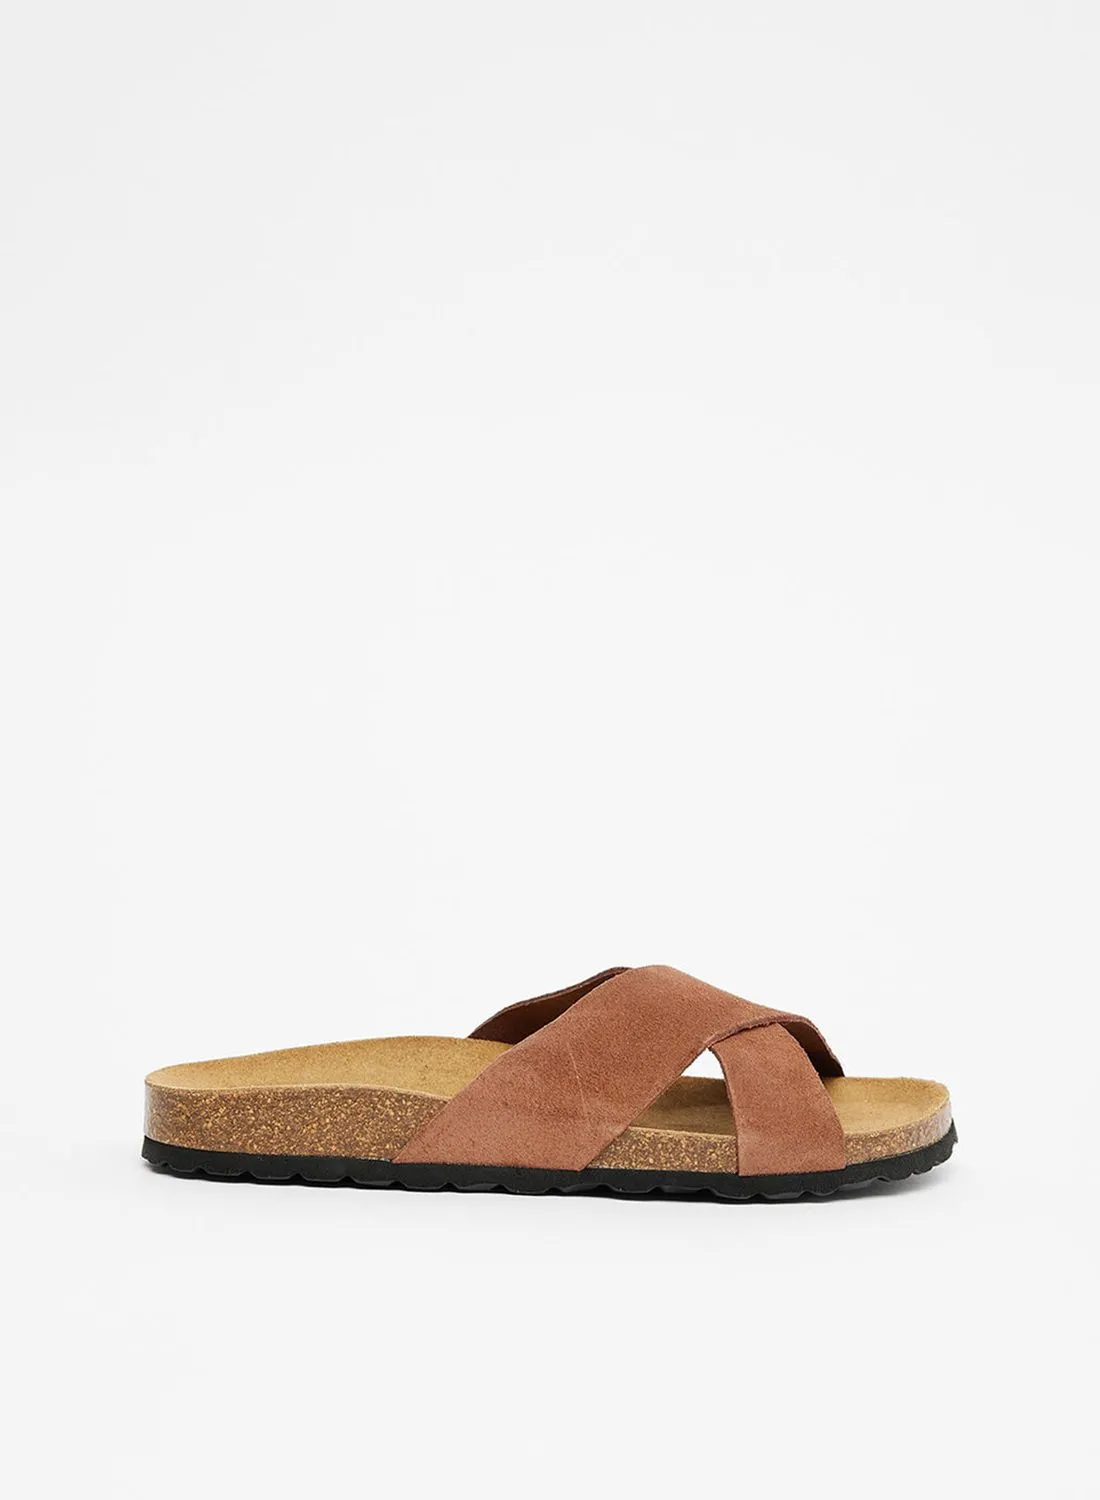 ONLY Suede Flat Sandals